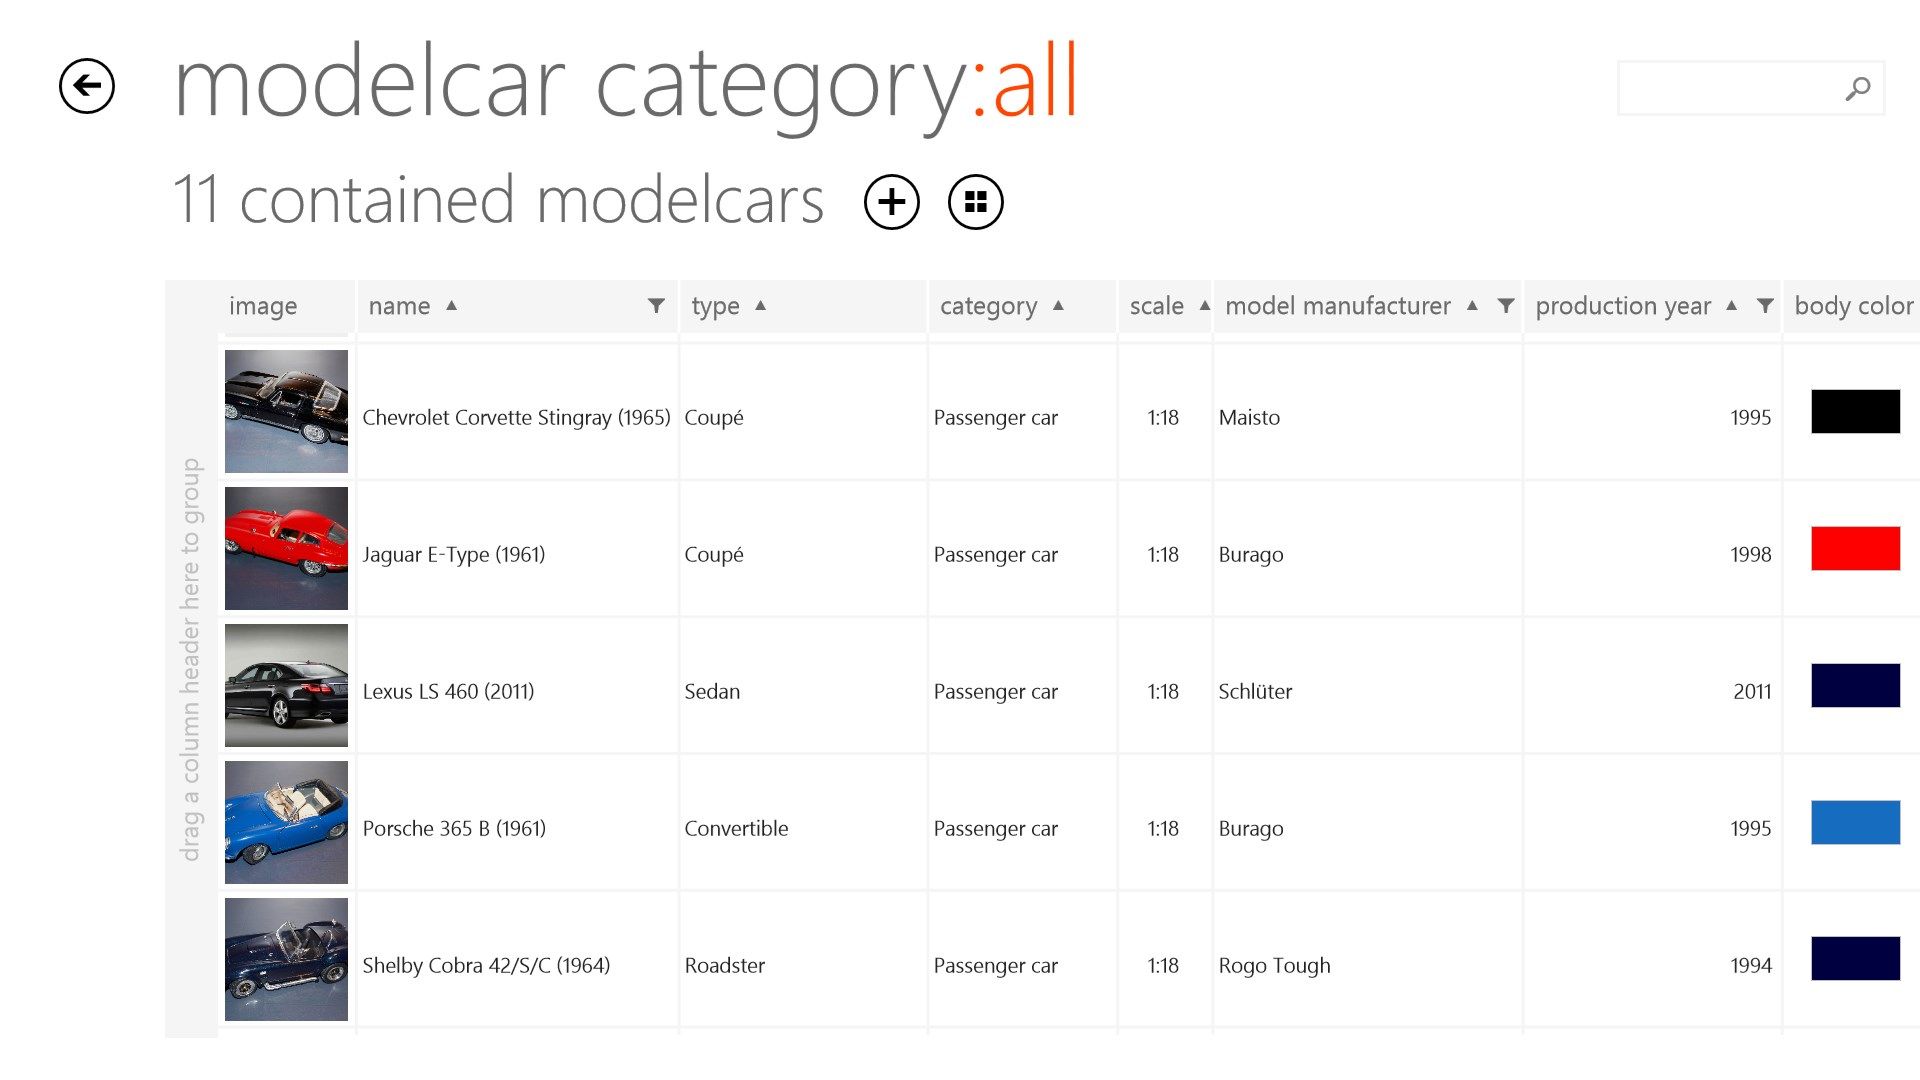 Overview of the model car category "all" as table listing